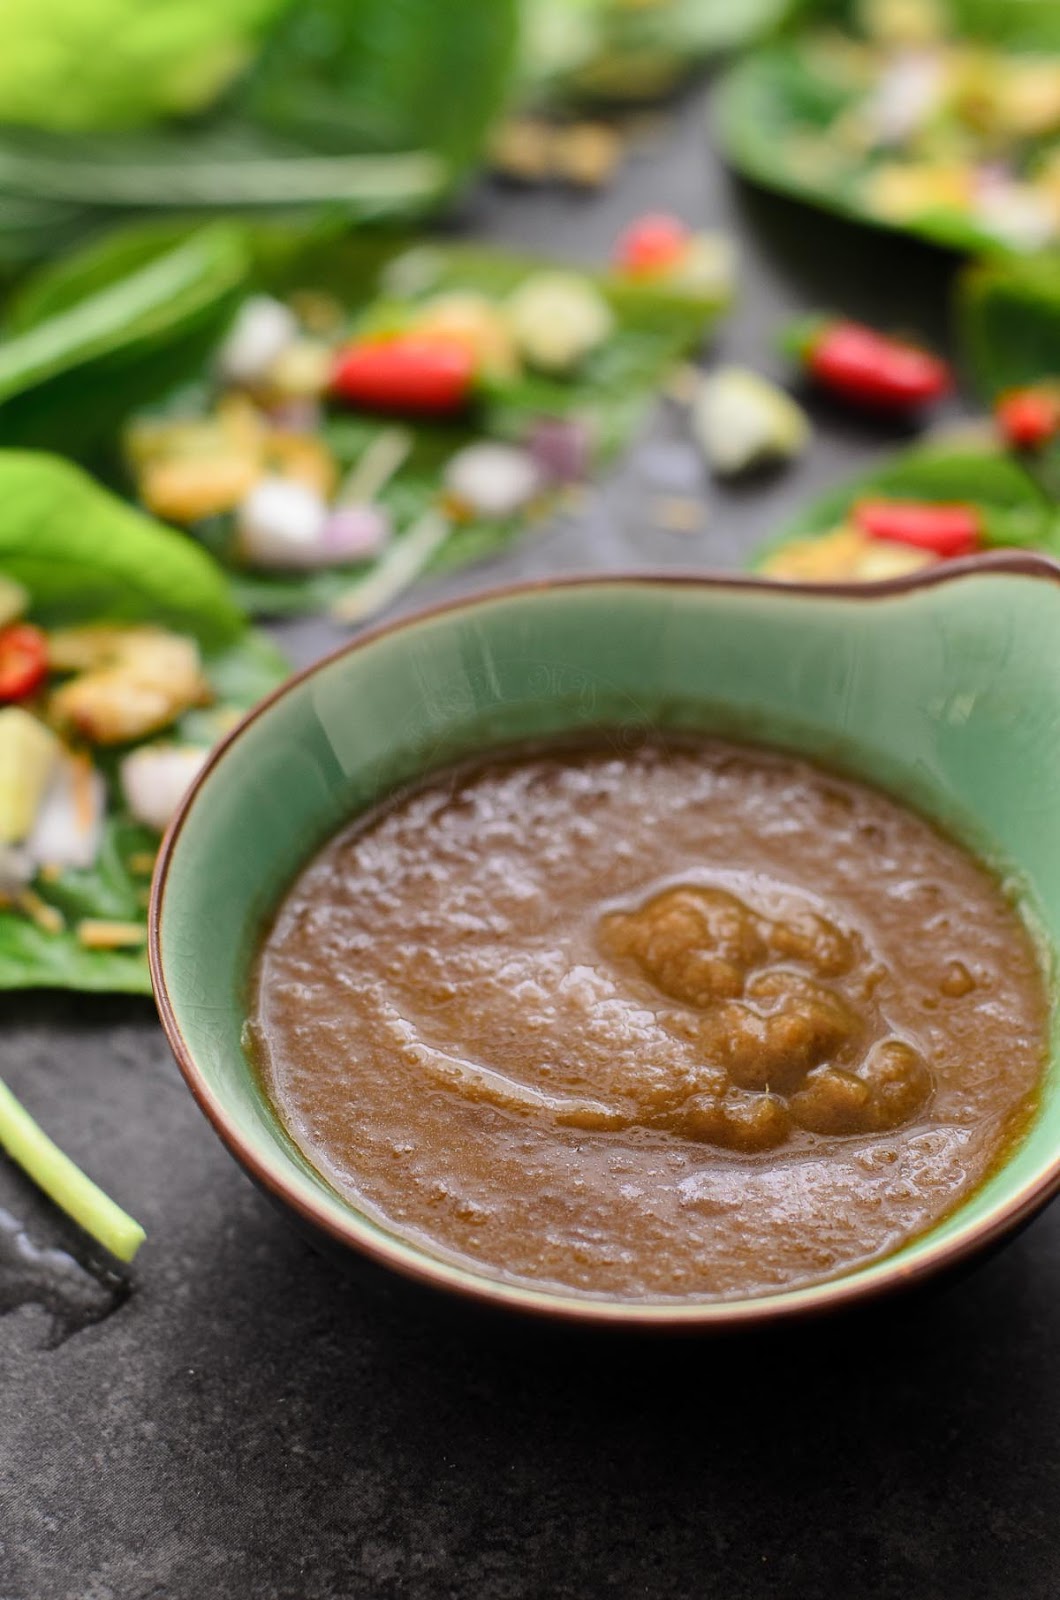 Miang Kham sauce is sweet with a tinge of spice.